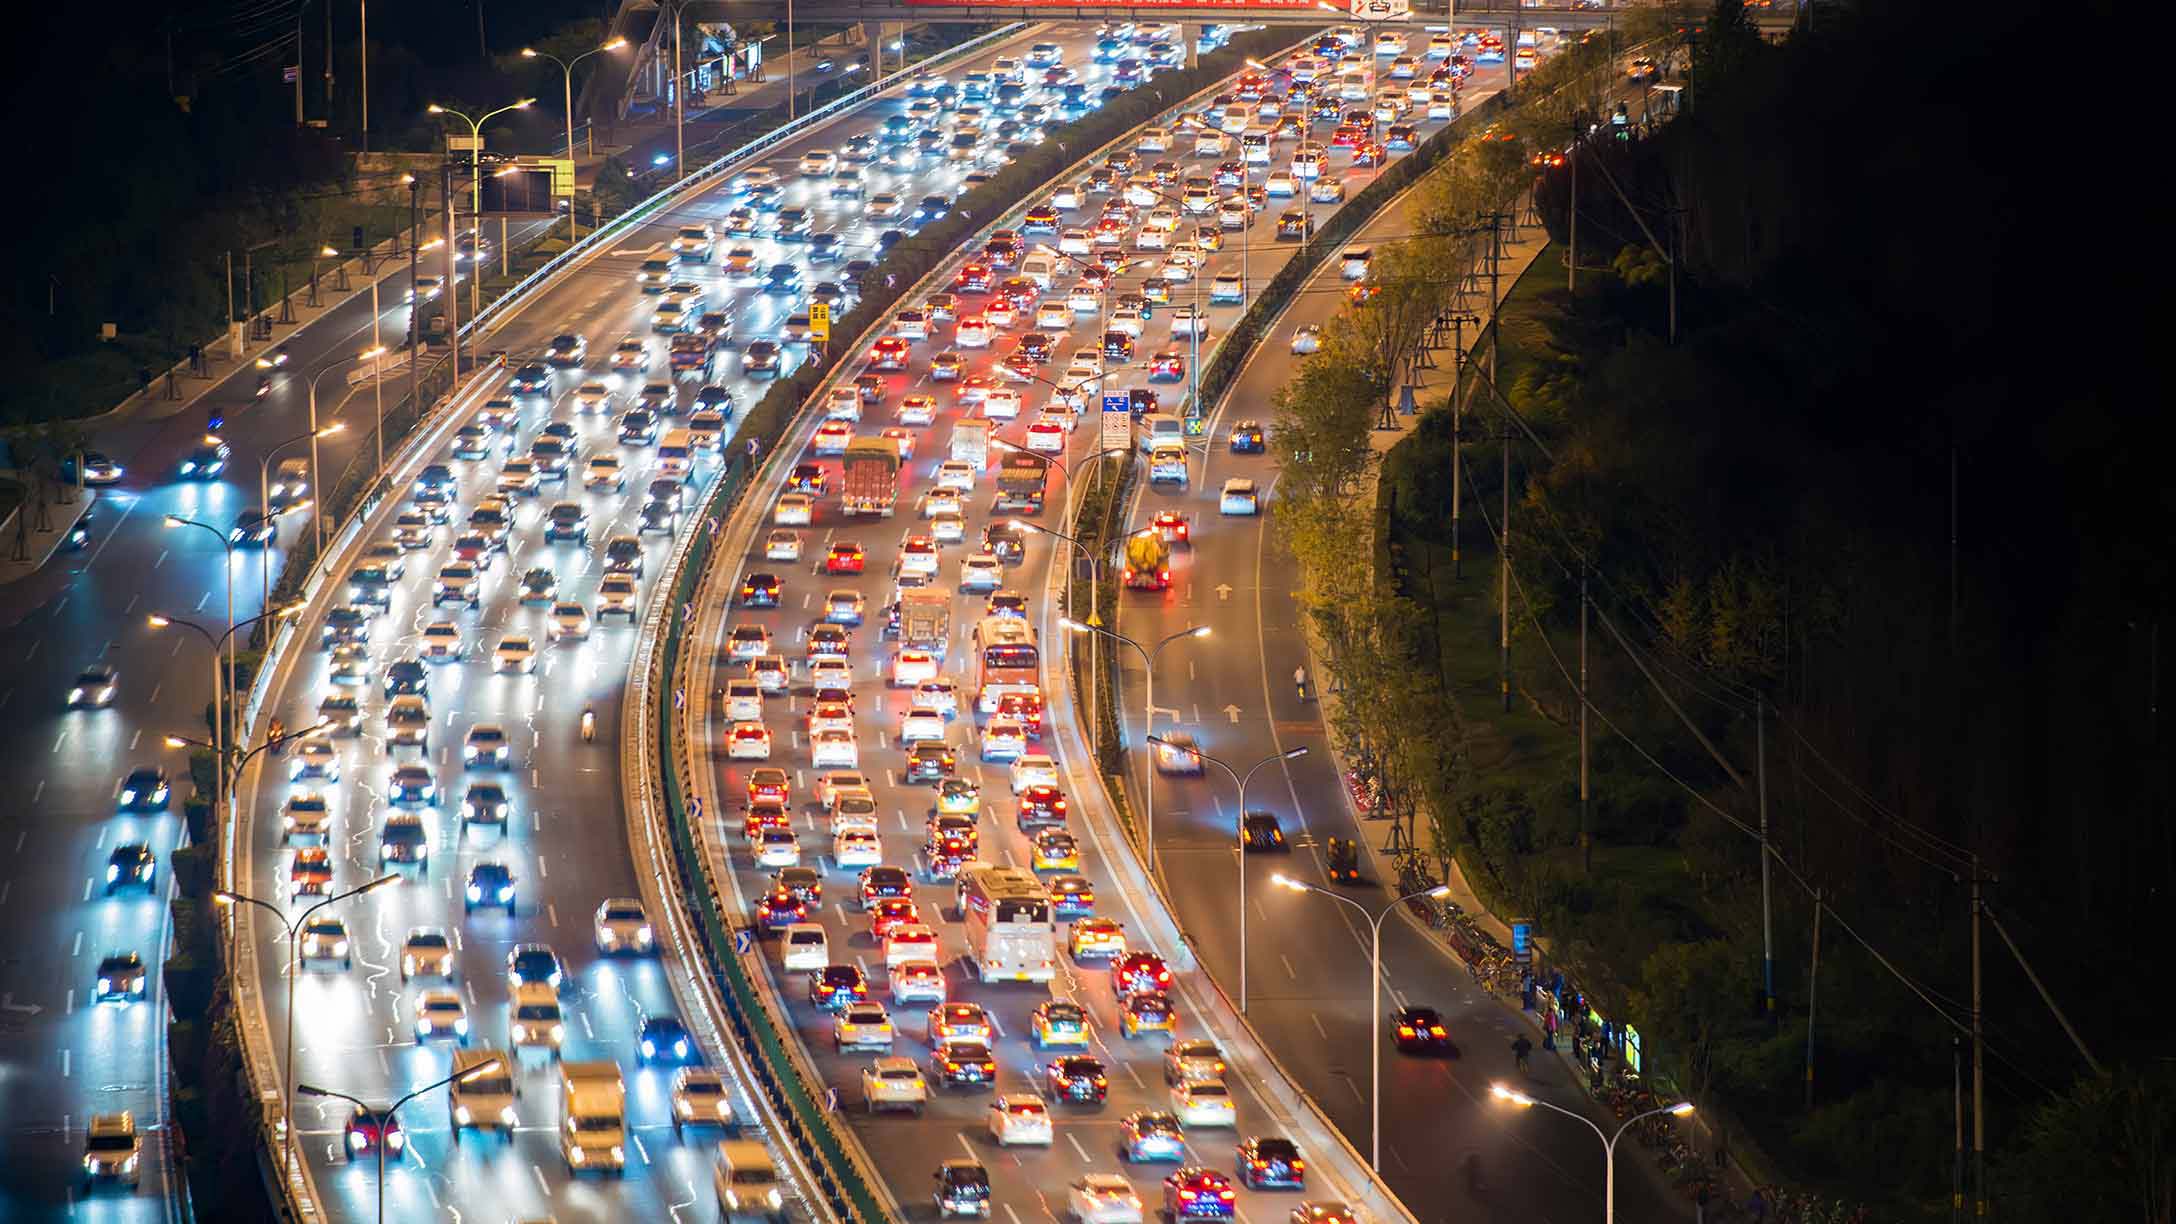 Could AI help solve traffic congestion and reduce traffic accidents?